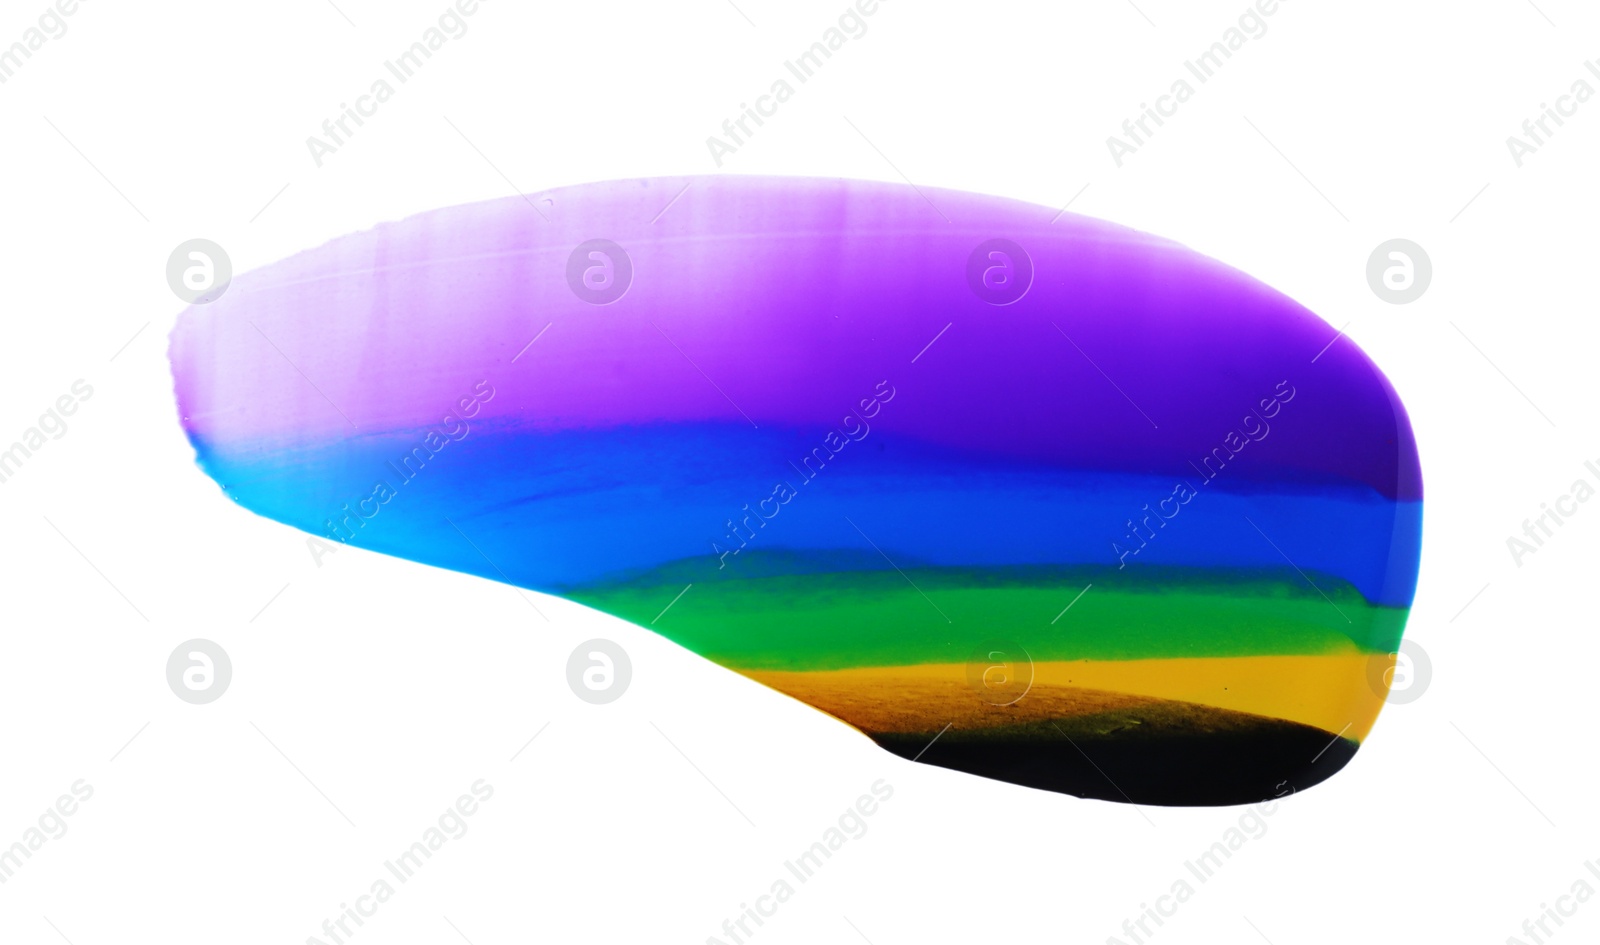 Photo of Purple, blue, green and yellow chameleon paint samples on white background, top view